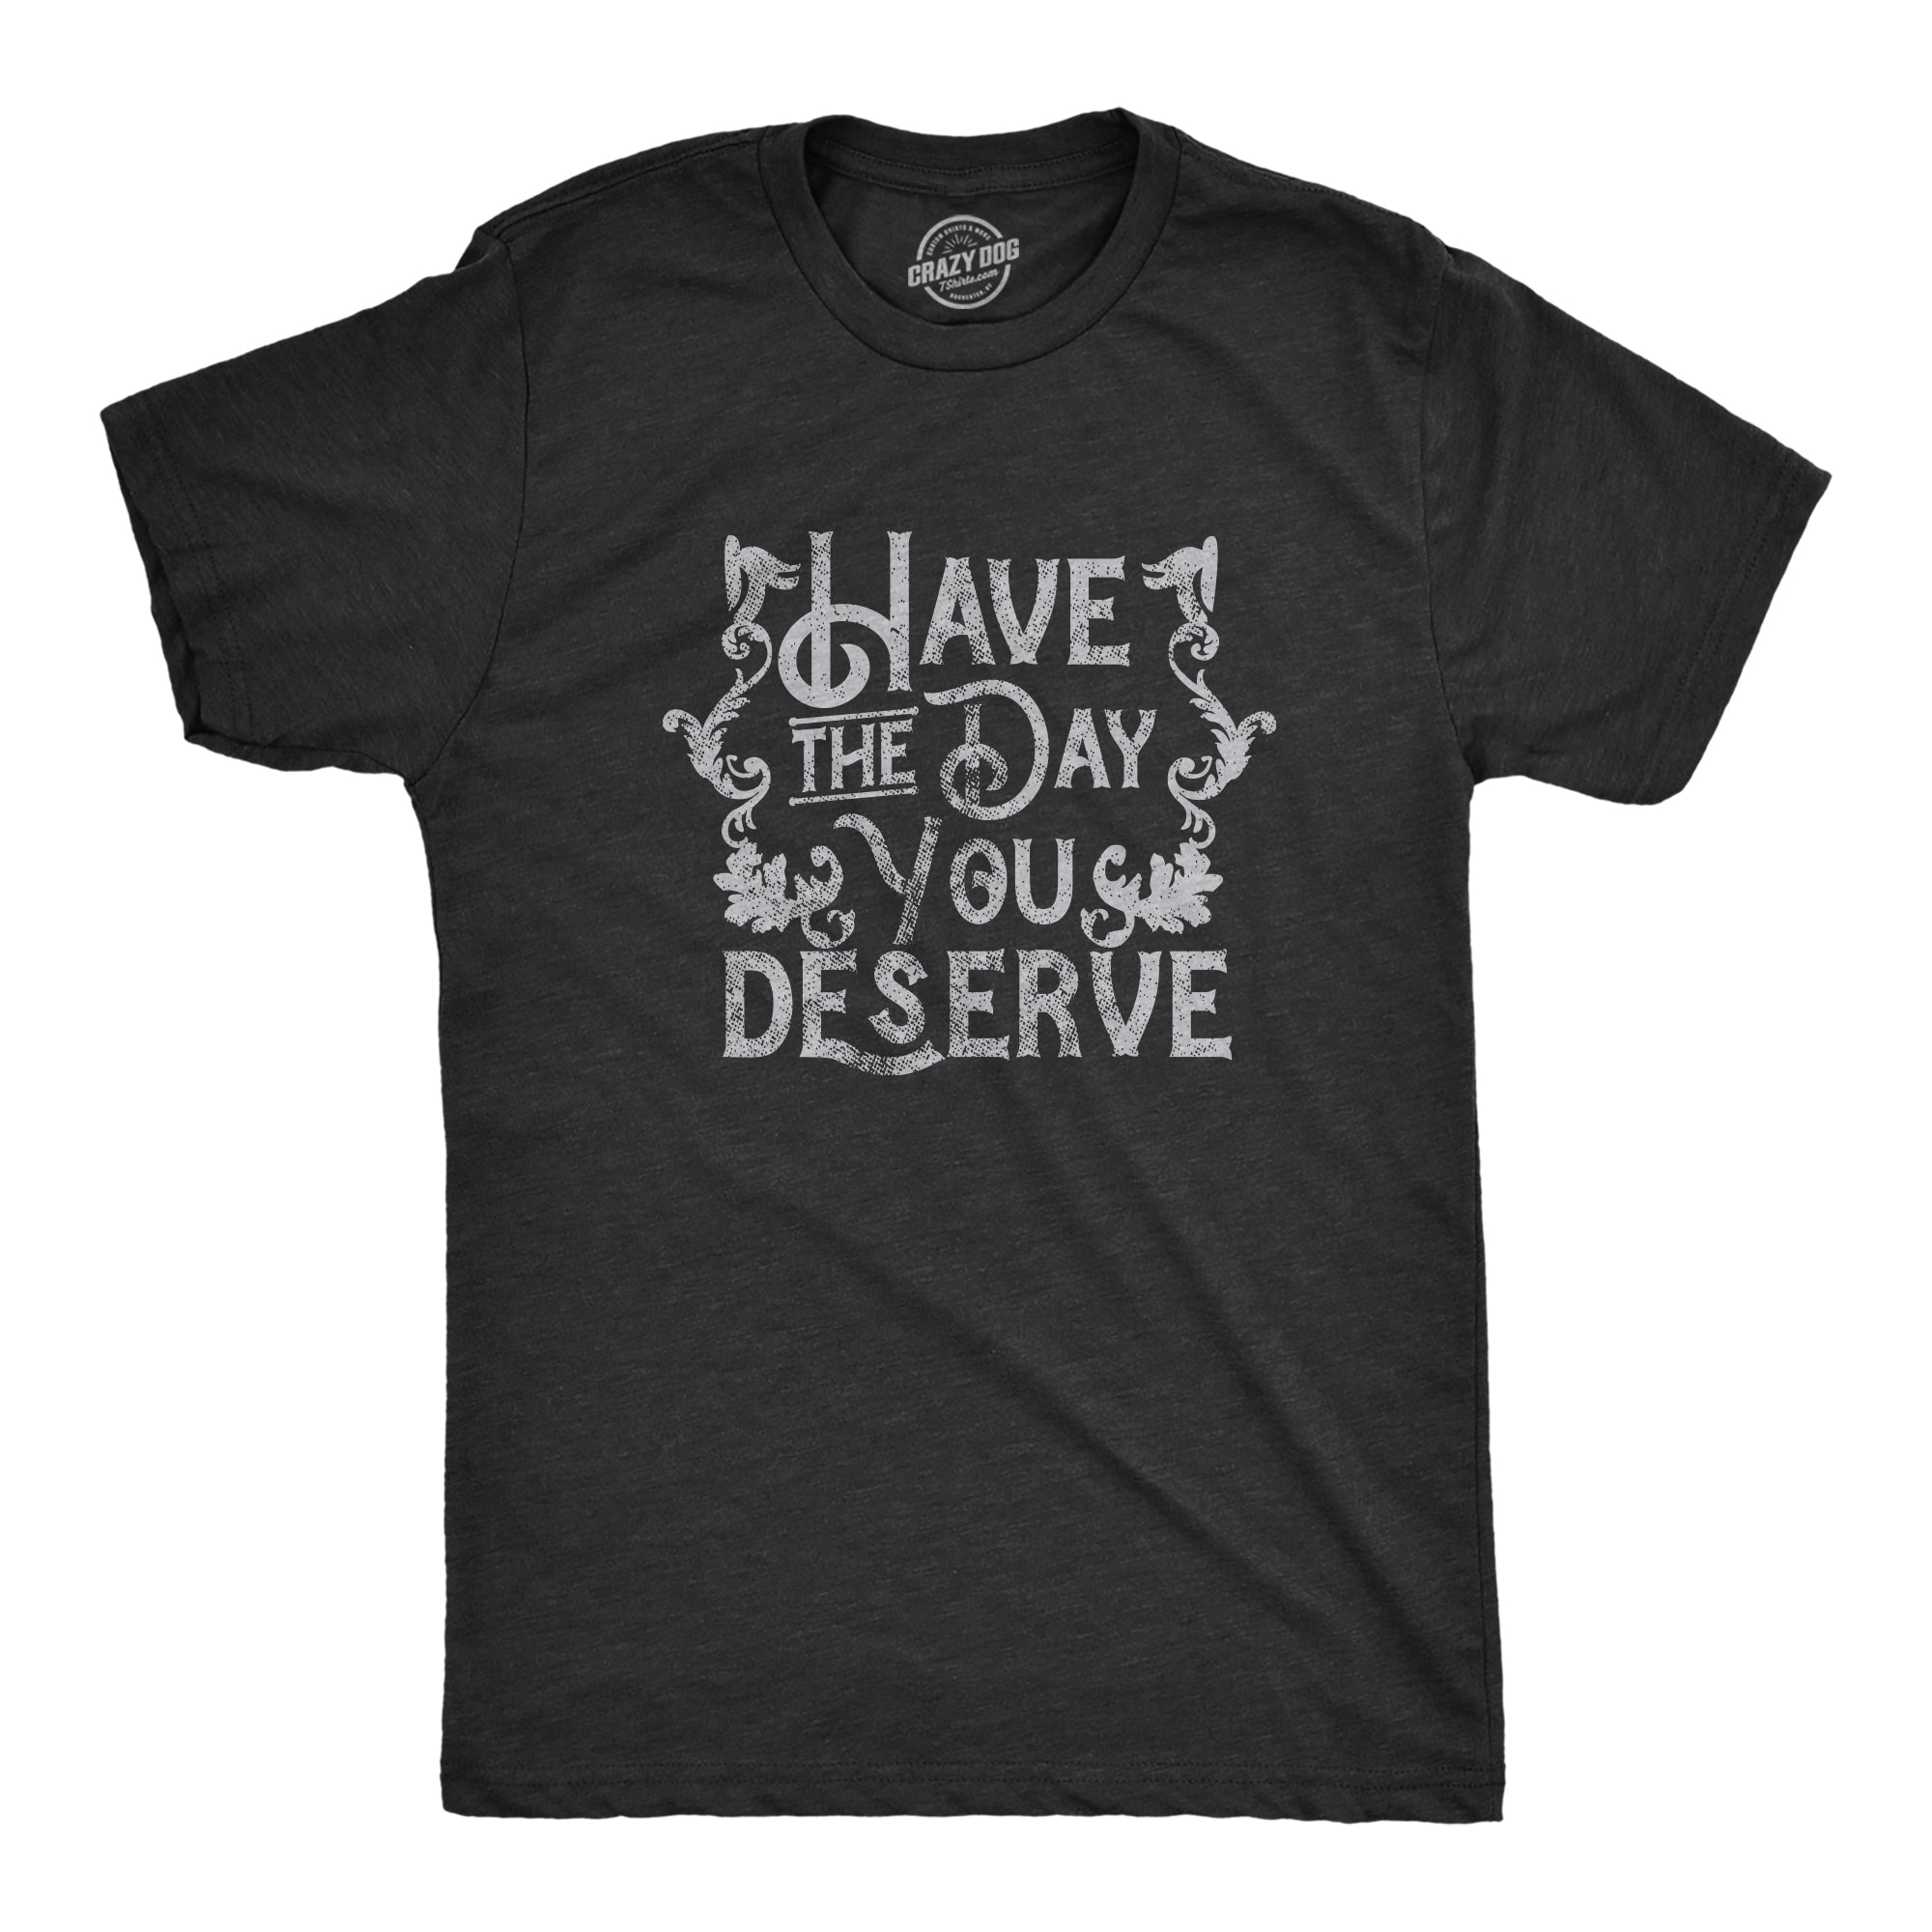 Funny Heather Black - DESERVE Have The Day You Deserve Mens T Shirt Nerdy Sarcastic Tee